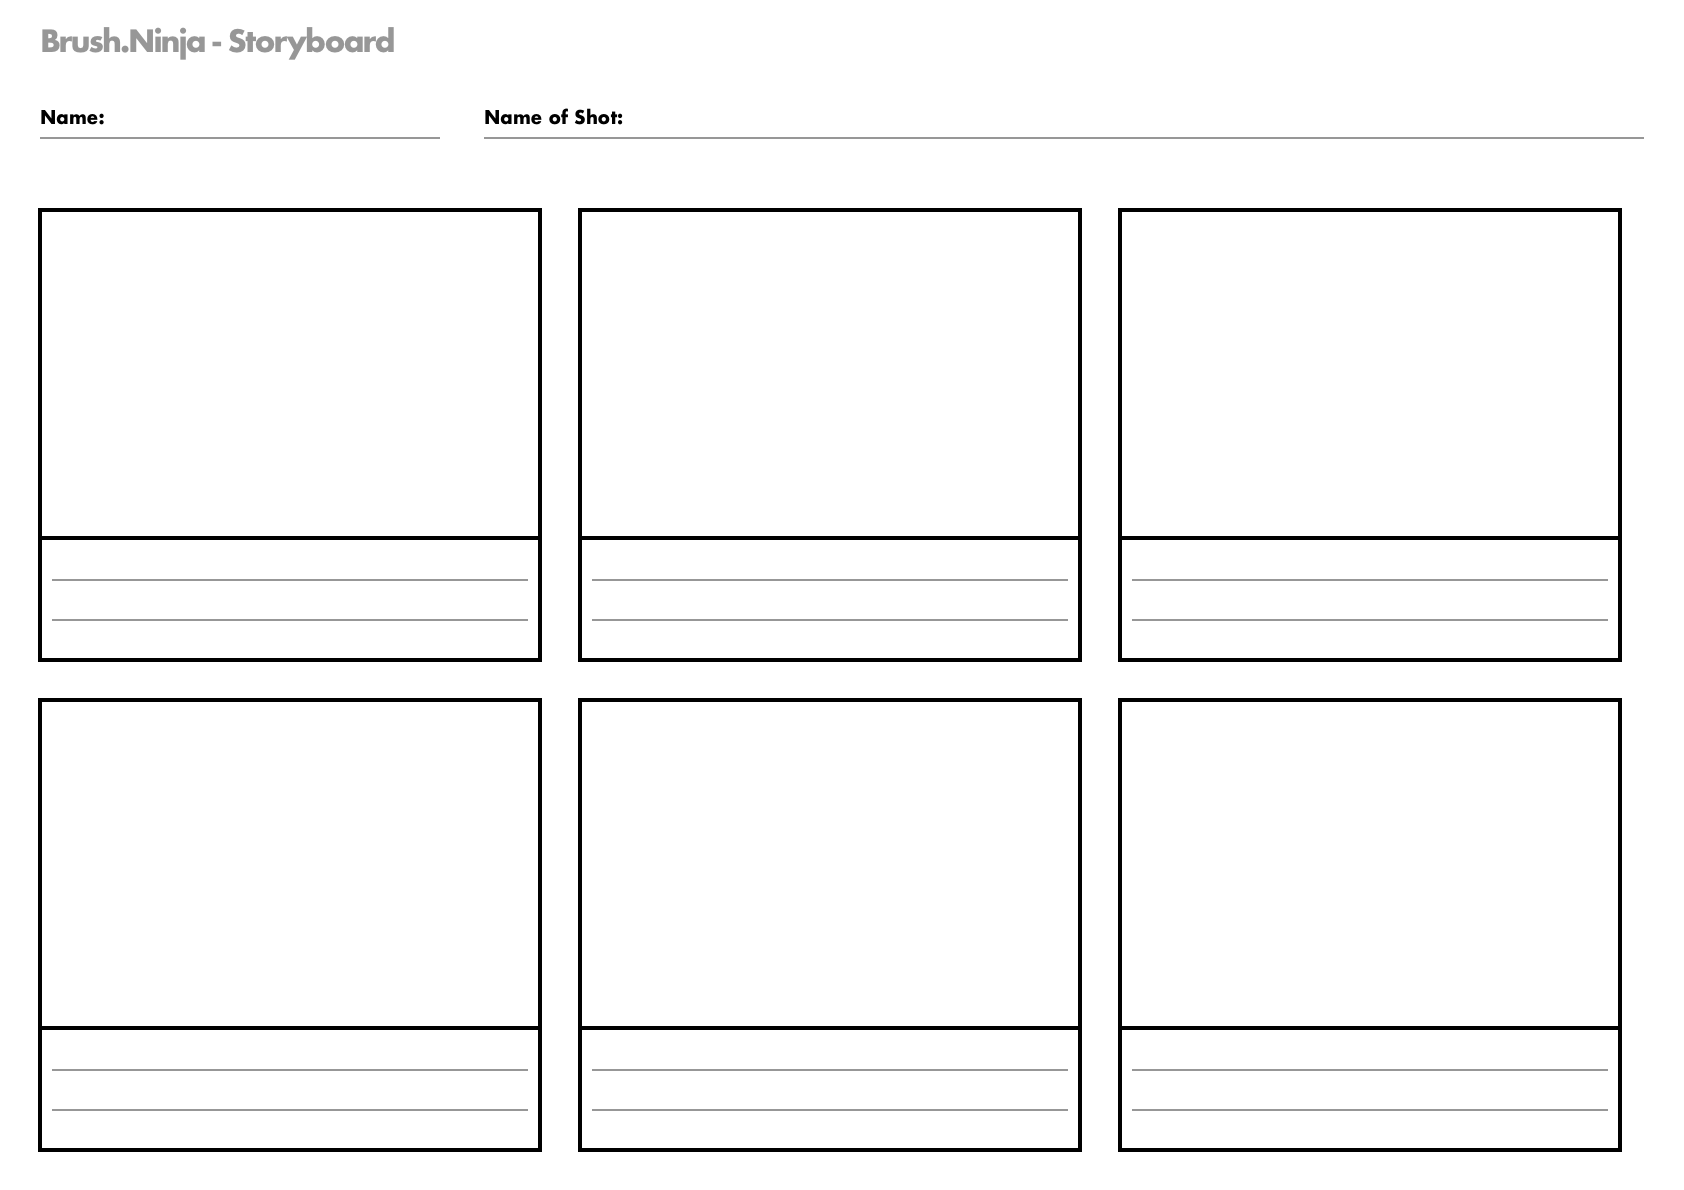 Example Storyboard layout